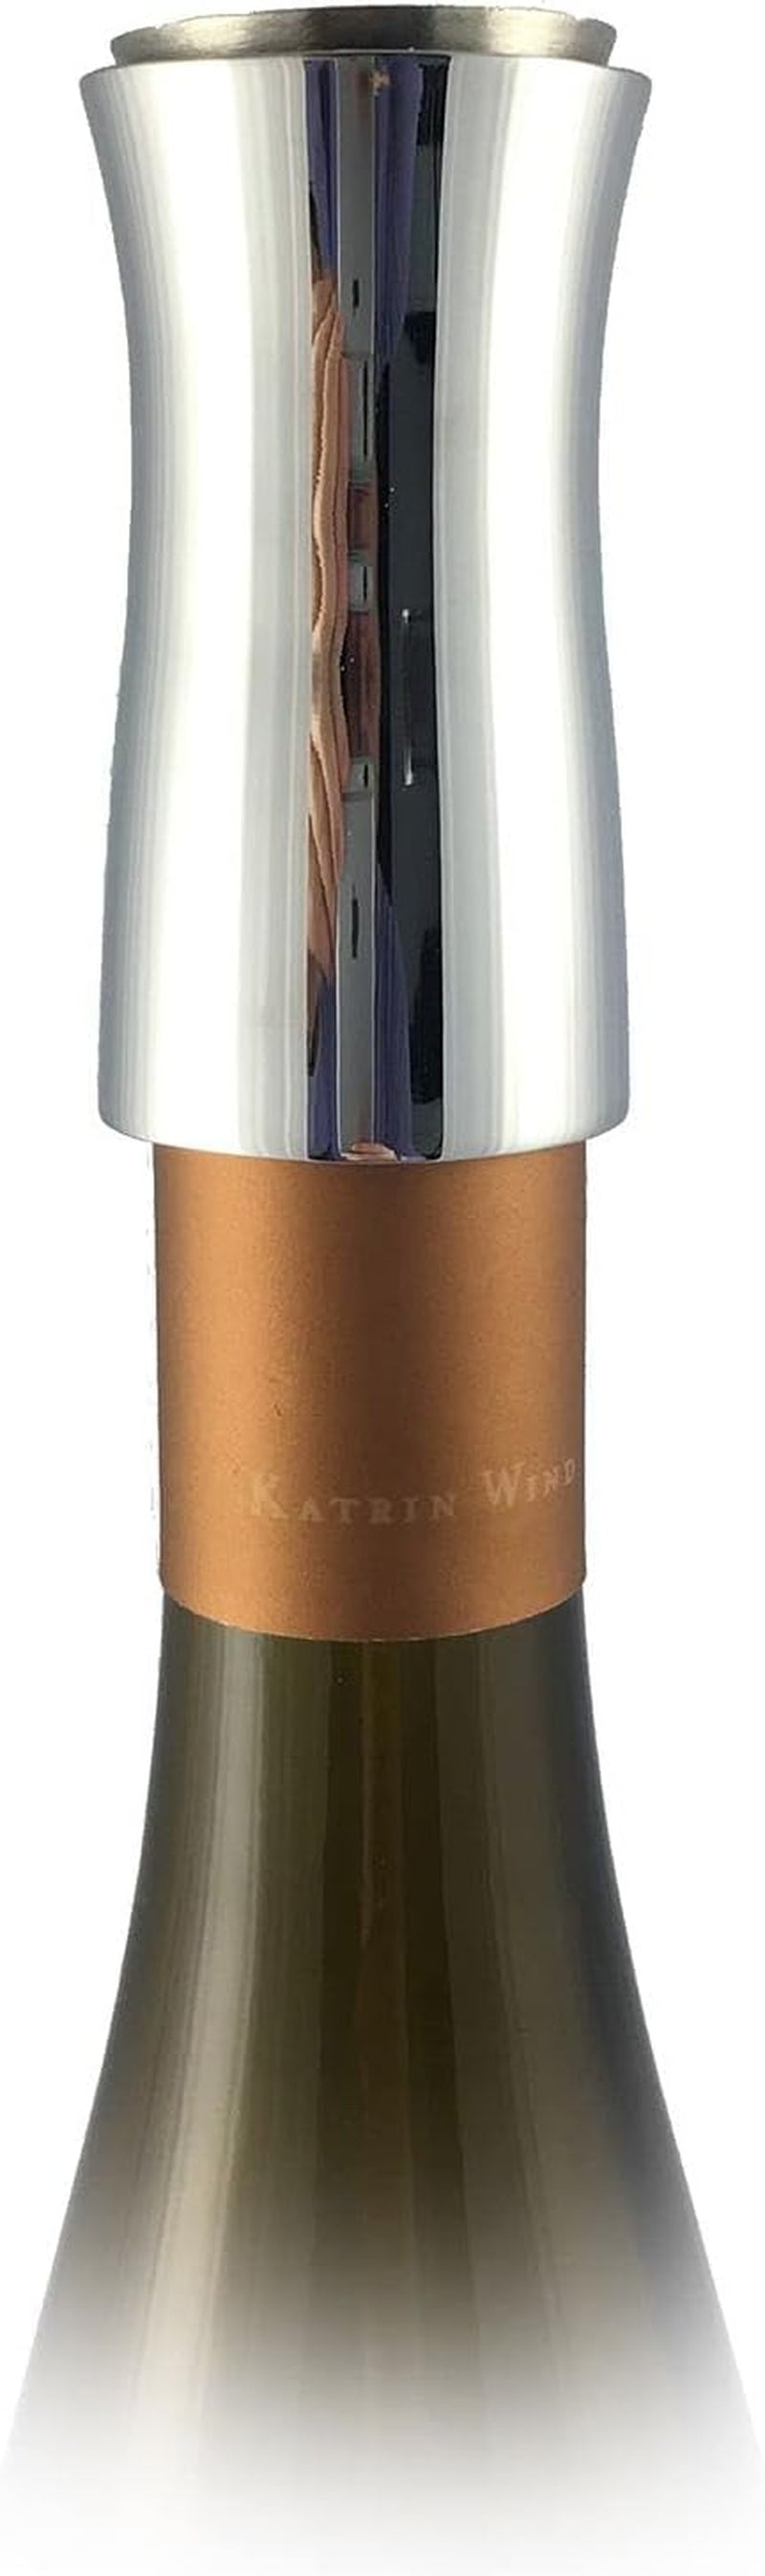 Wine Aerator 7-in-1 - VAGNBYS Wine Decanter with Aerator, Wine Filter, Wine Pourer, Wine Stopper, and Wine Dispenser All-In-One Product - Decantiere (Stainless Silver)